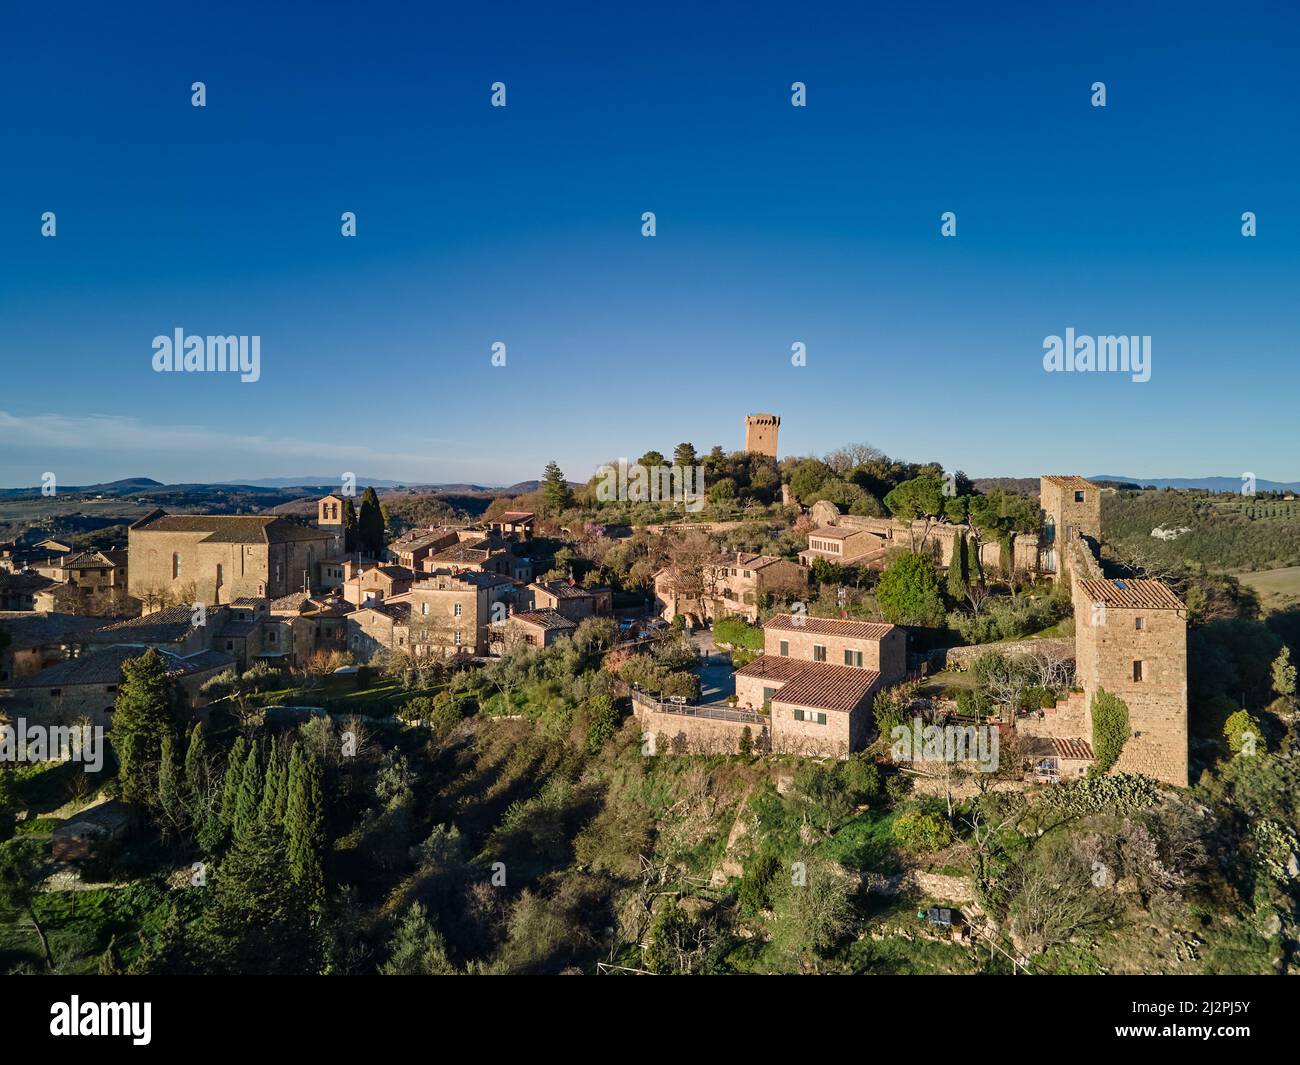 drone shot of medieval town Monticchiello, Tuscany, Italy Stock Photo